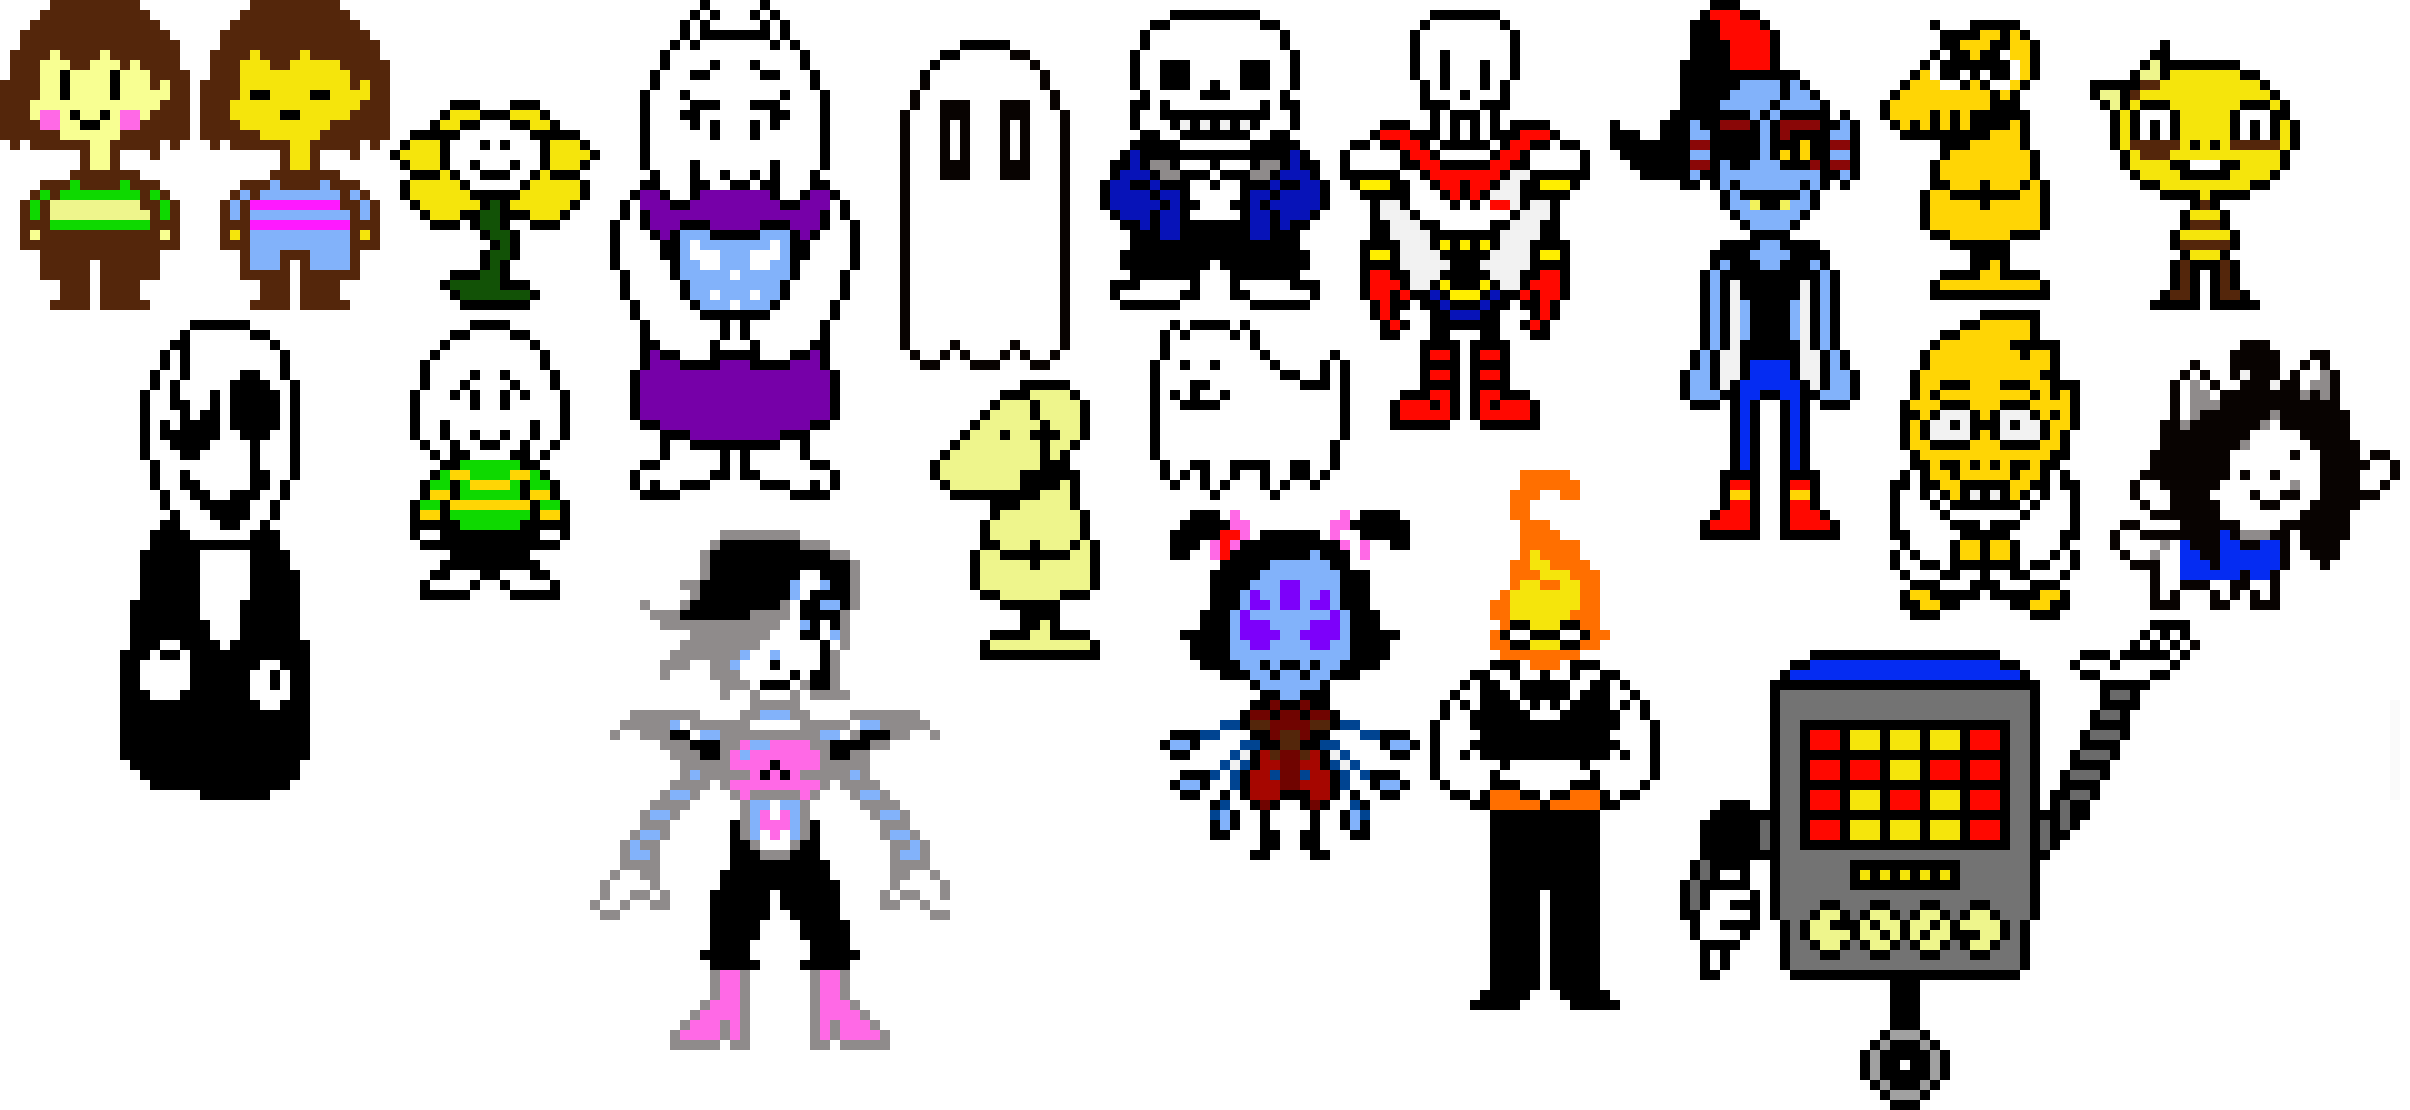 Most Of The Undertale Characters Pixel Art Maker